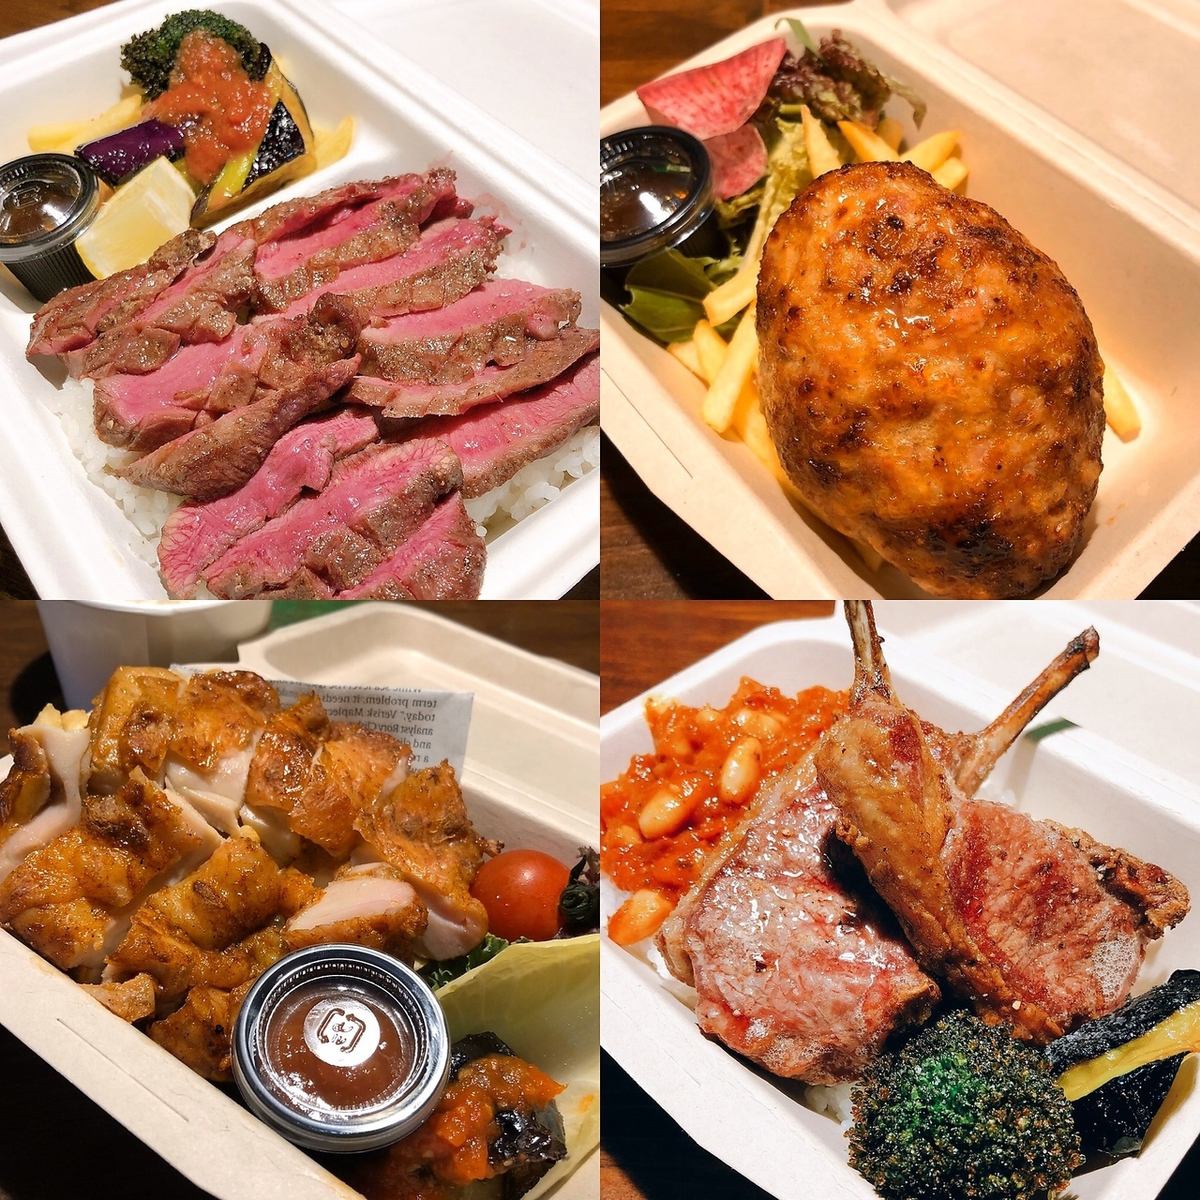 Shimokitazawa Station 5 minutes ♪ Talks and sake progress on various meat dishes directly managed by butchers! For dates, meals, banquets